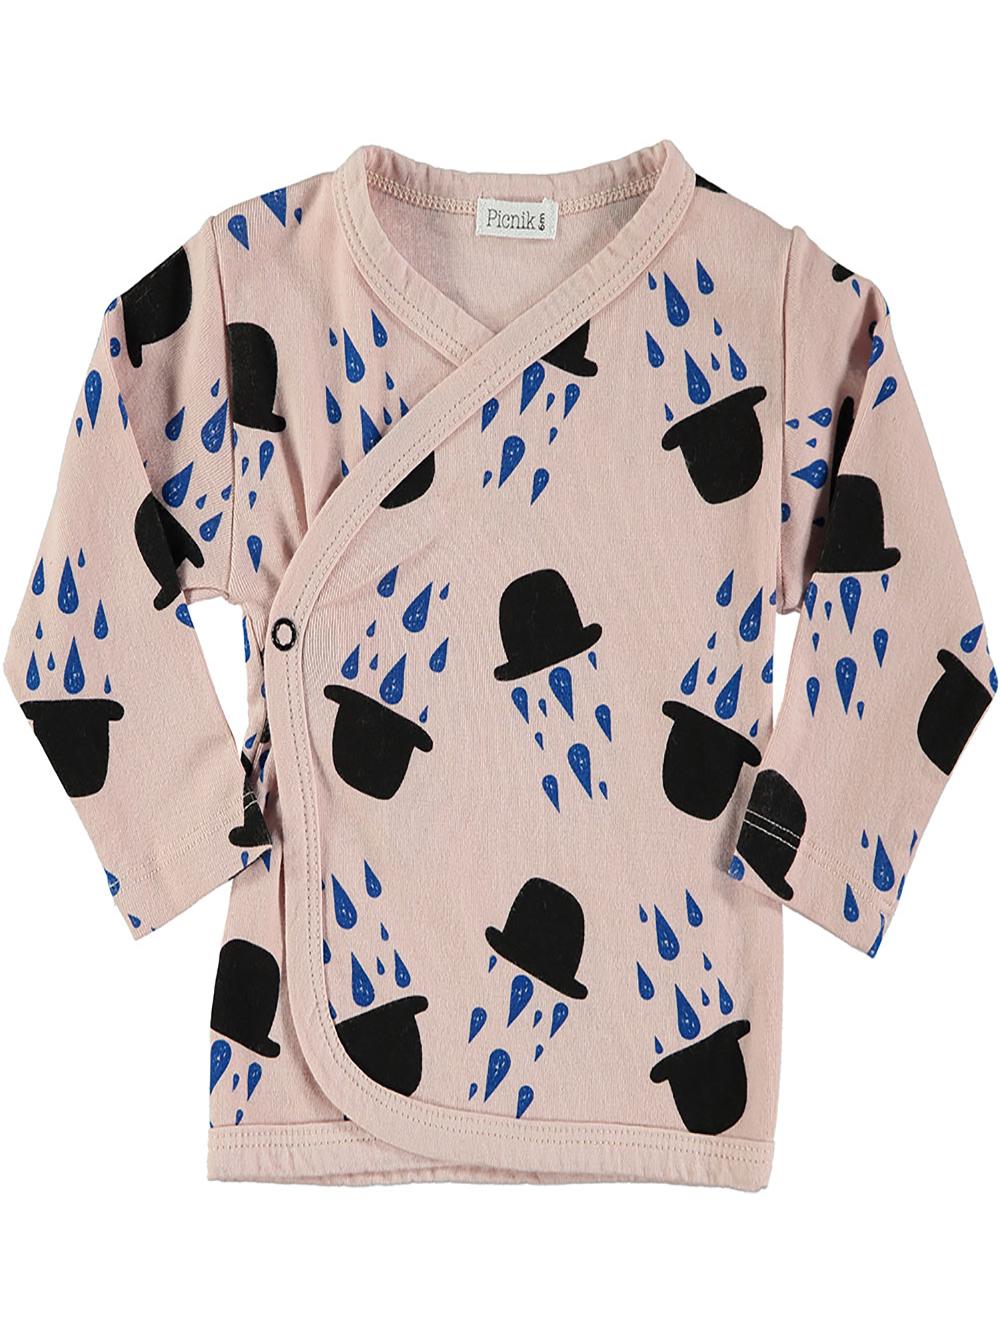 CROSS-OVER BABY T-SHIRT WITH HATS AND DROPS PRINT PALE PINK